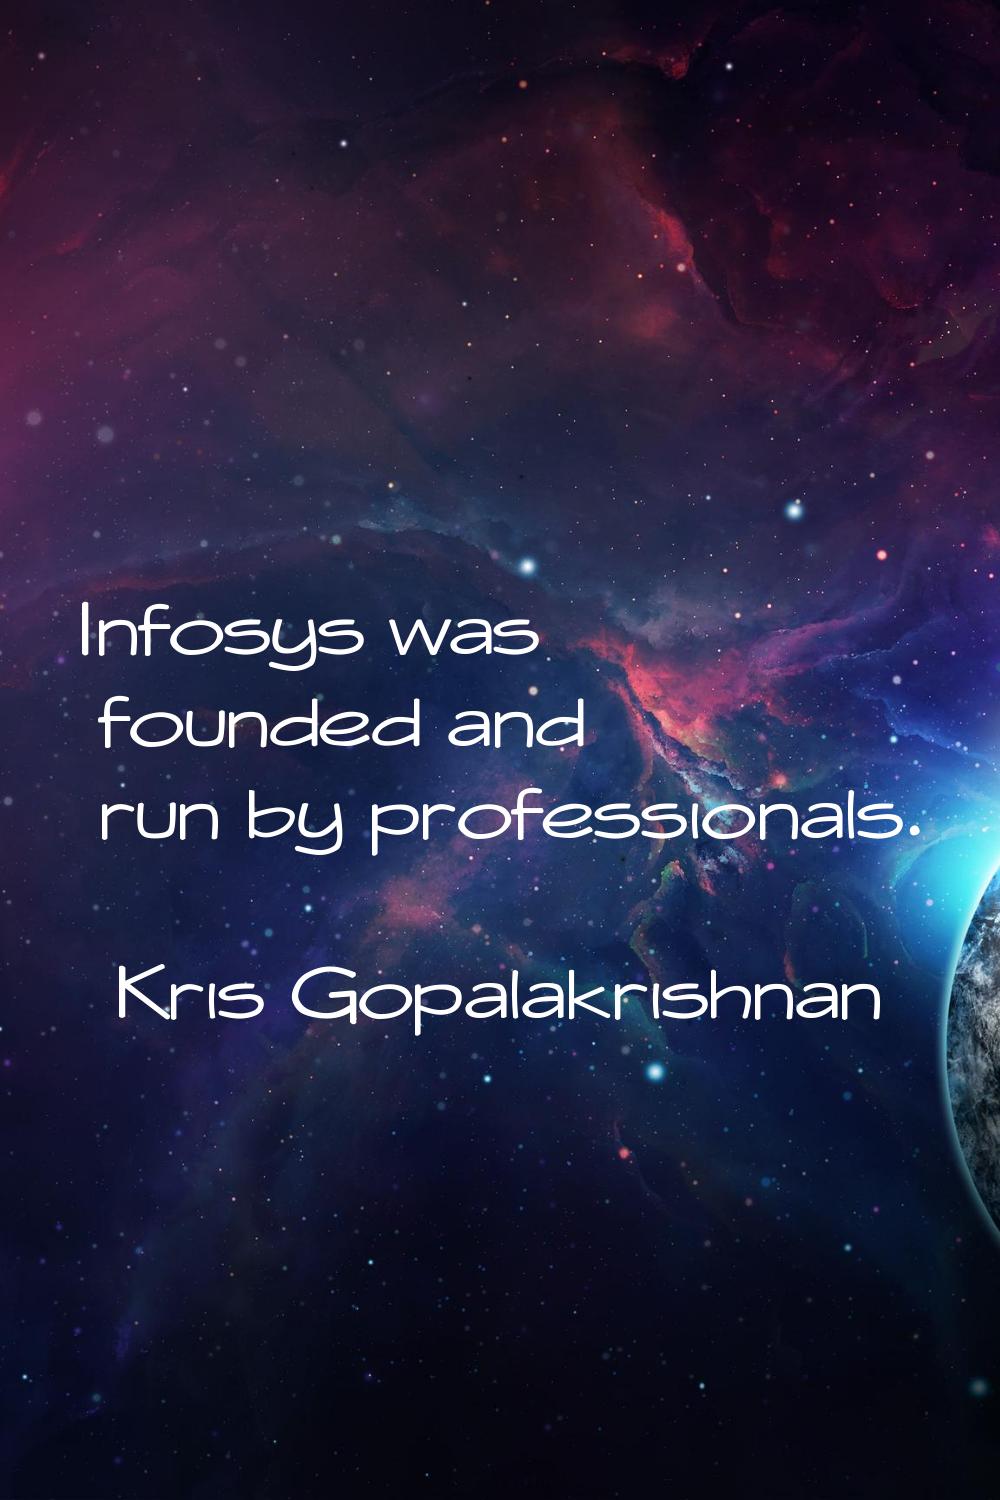 Infosys was founded and run by professionals.